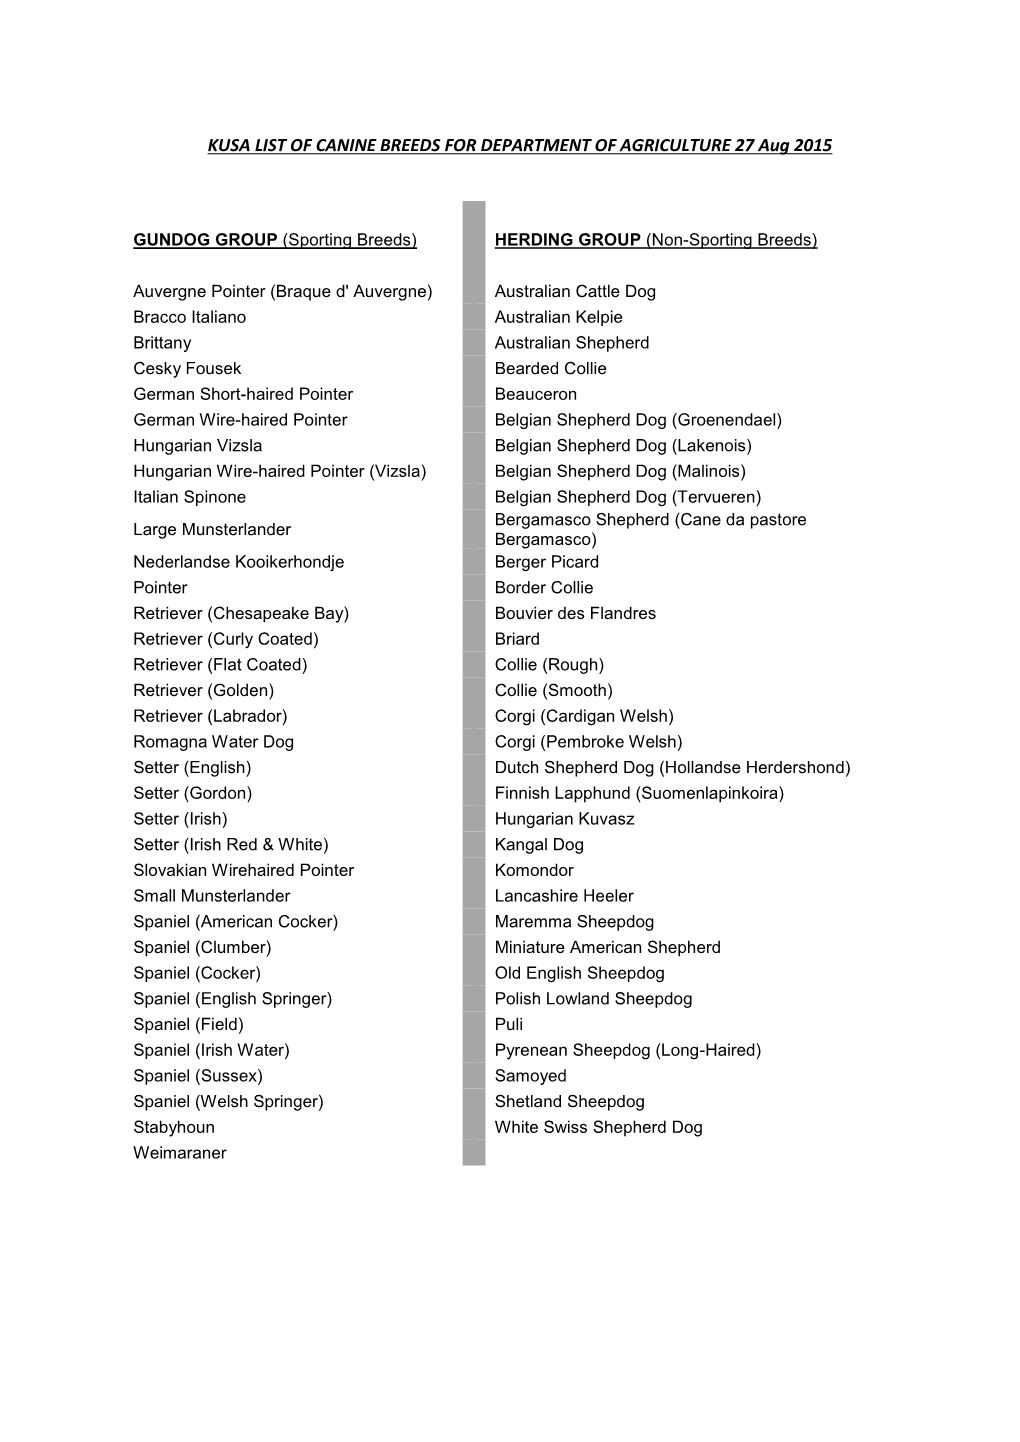 KUSA LIST of CANINE BREEDS for DEPARTMENT of AGRICULTURE 27 Aug 2015